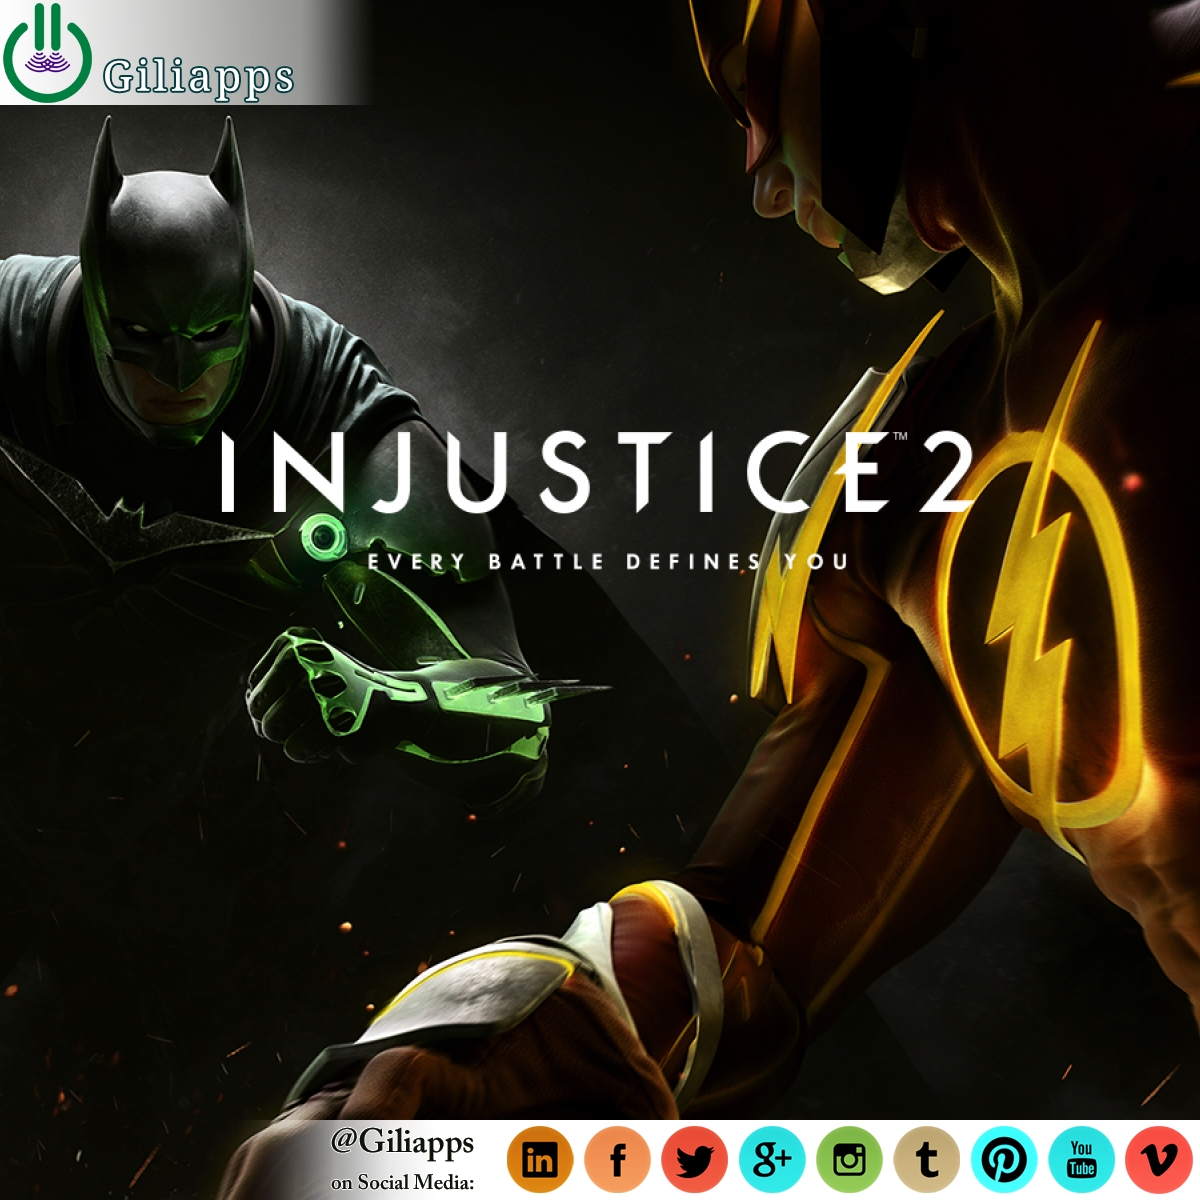 PC version of Injustice 2 will release on 14 Nov 2017